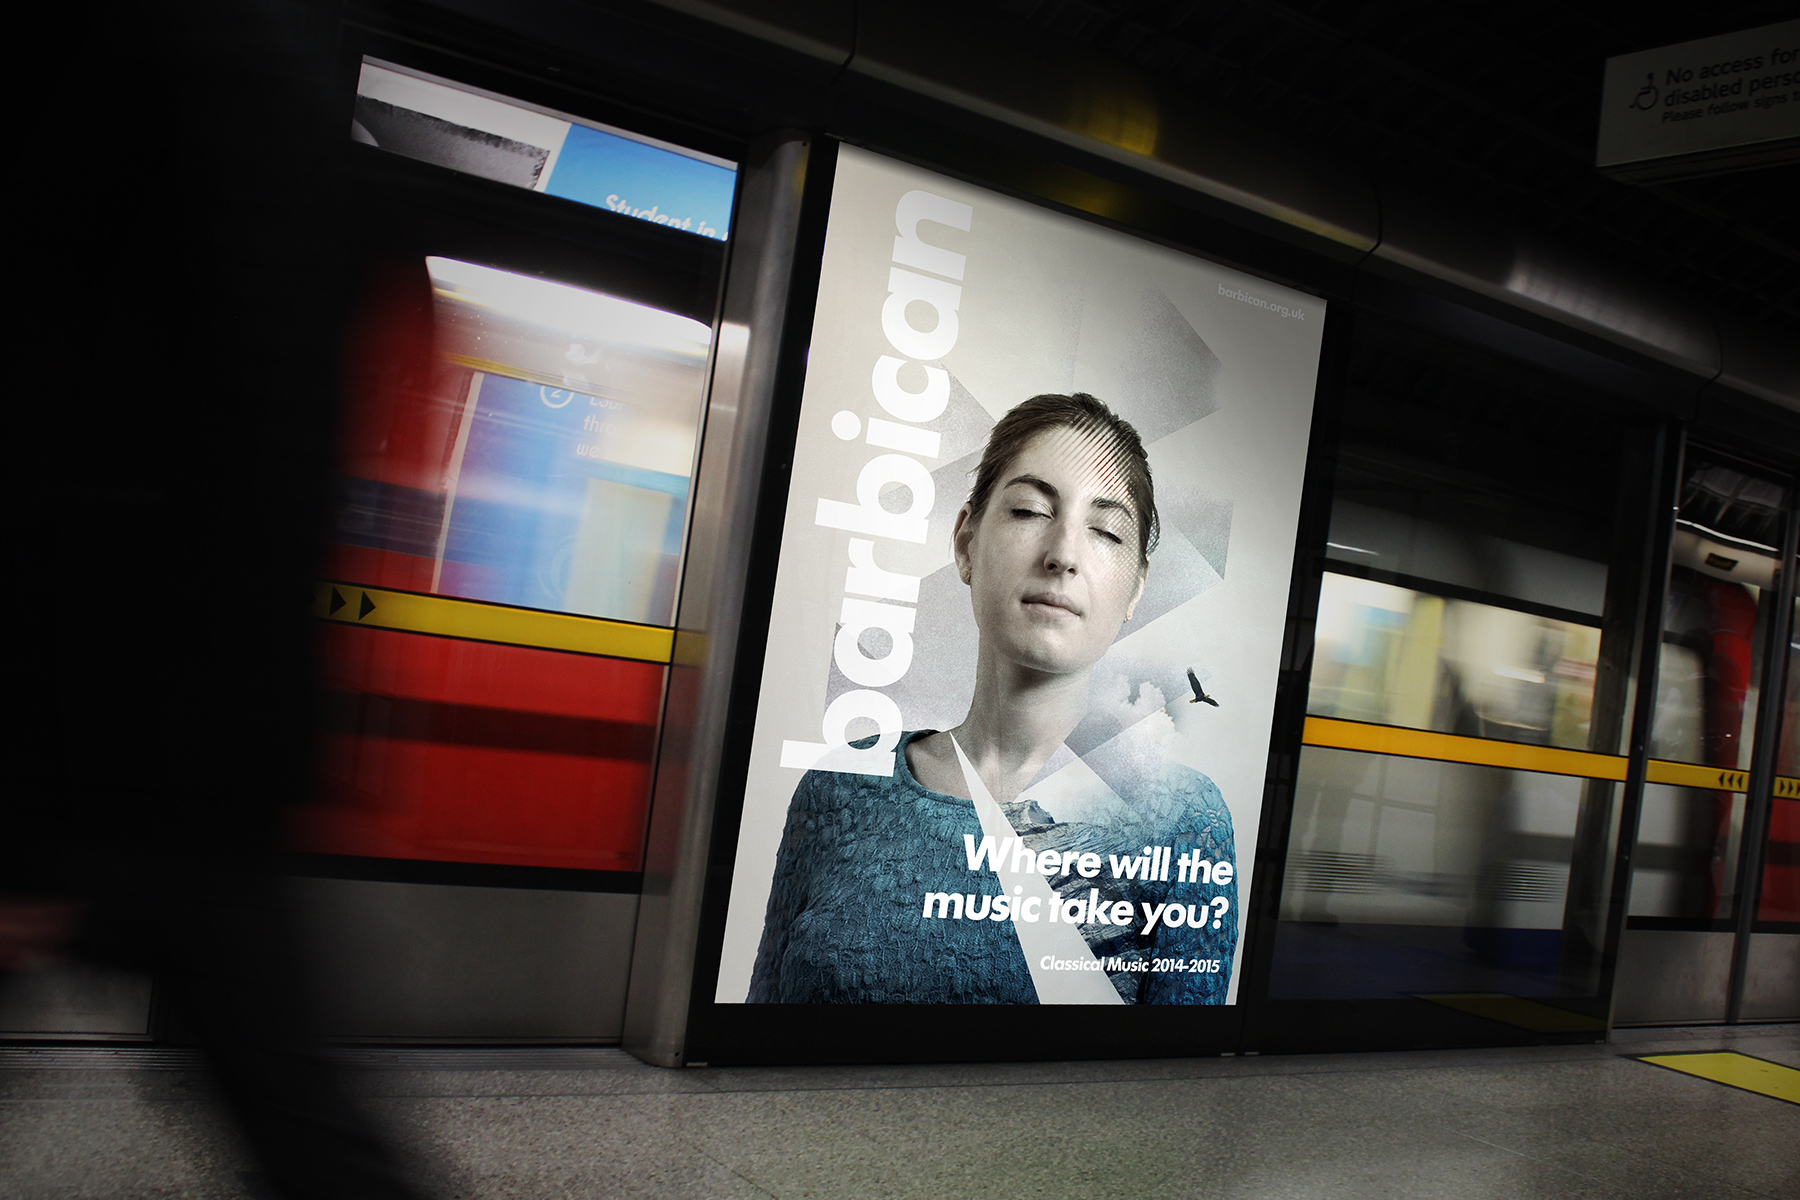 Firedog partnered with the Barbican over a four year period, producing a number of campaigns.